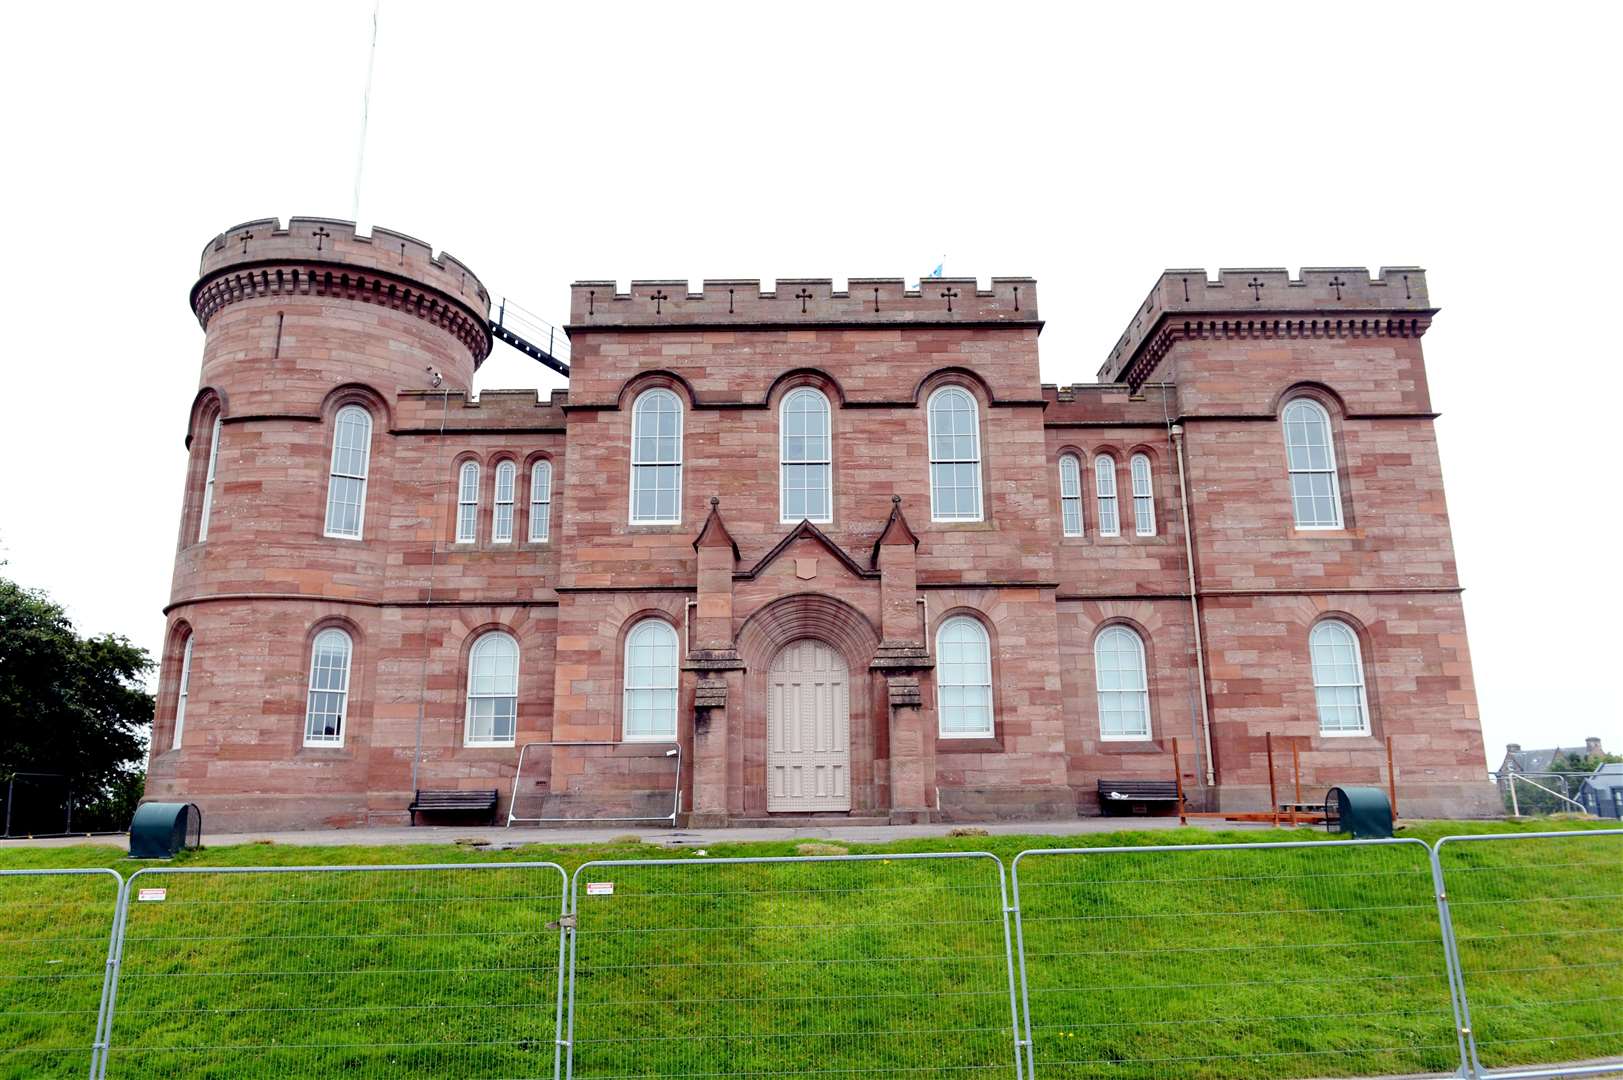 The enabling works on Inverness Castle are due to begin next month.